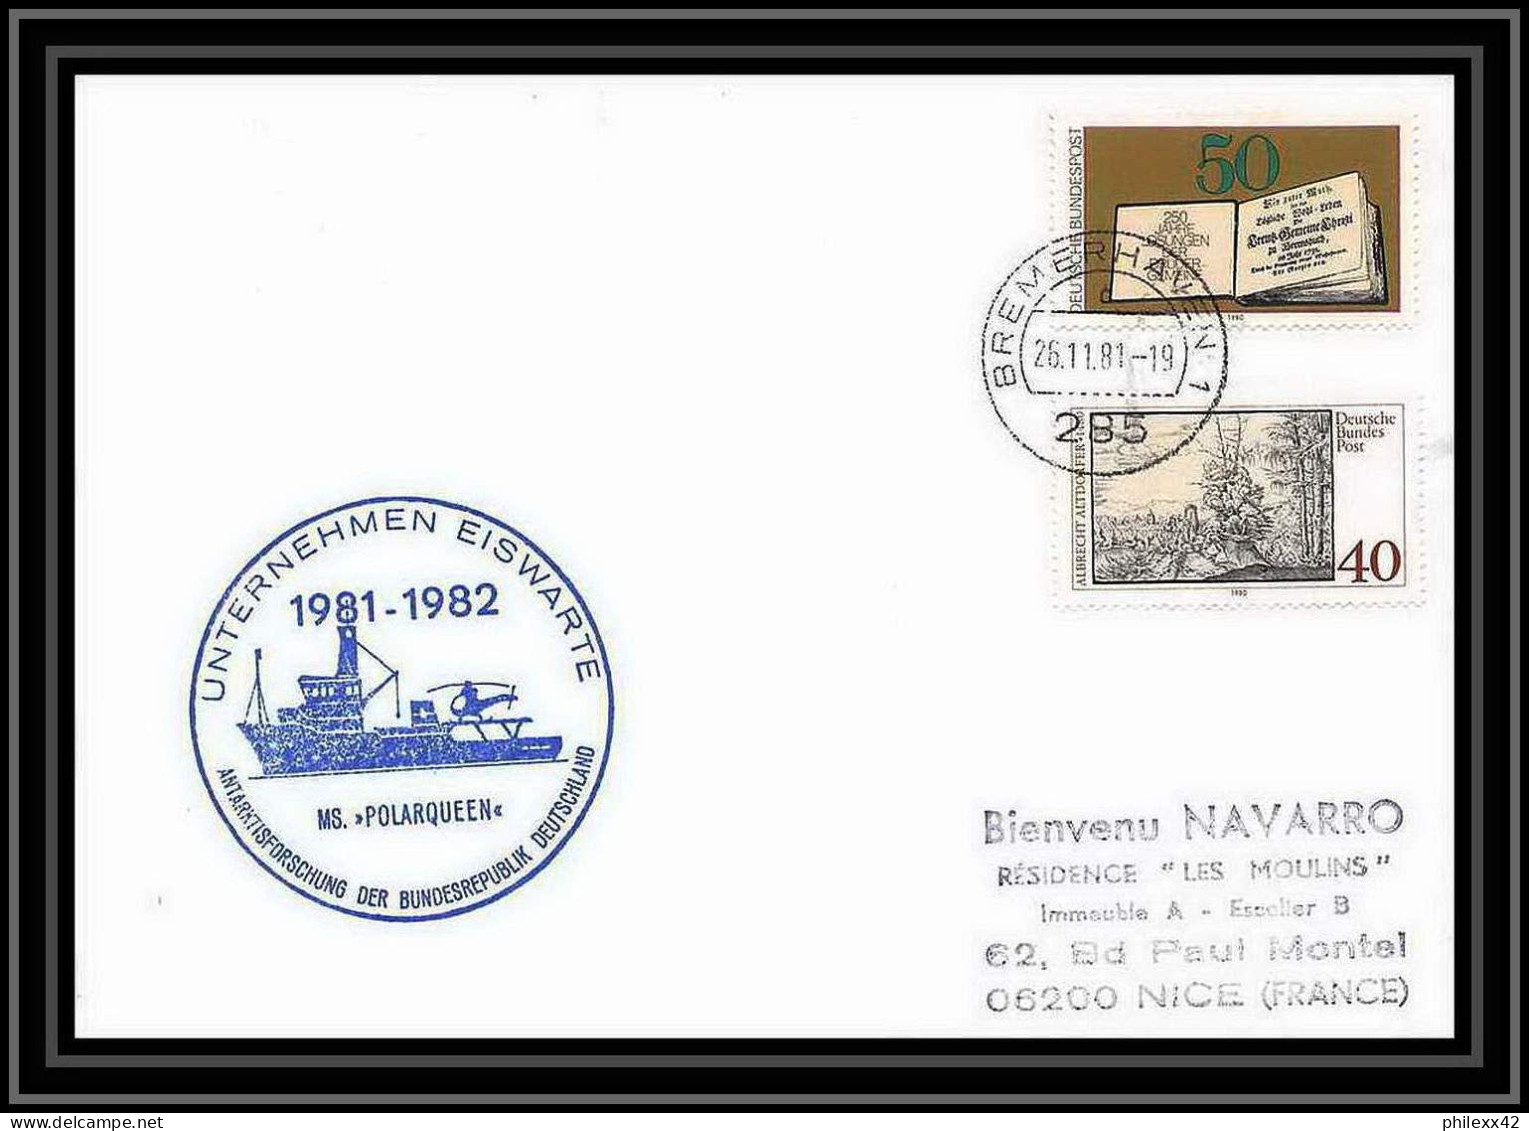 2021 Antarctic Allemagne (germany Bund) Lettre (cover) Ms Polarqueen 26/11/1981 - Research Stations